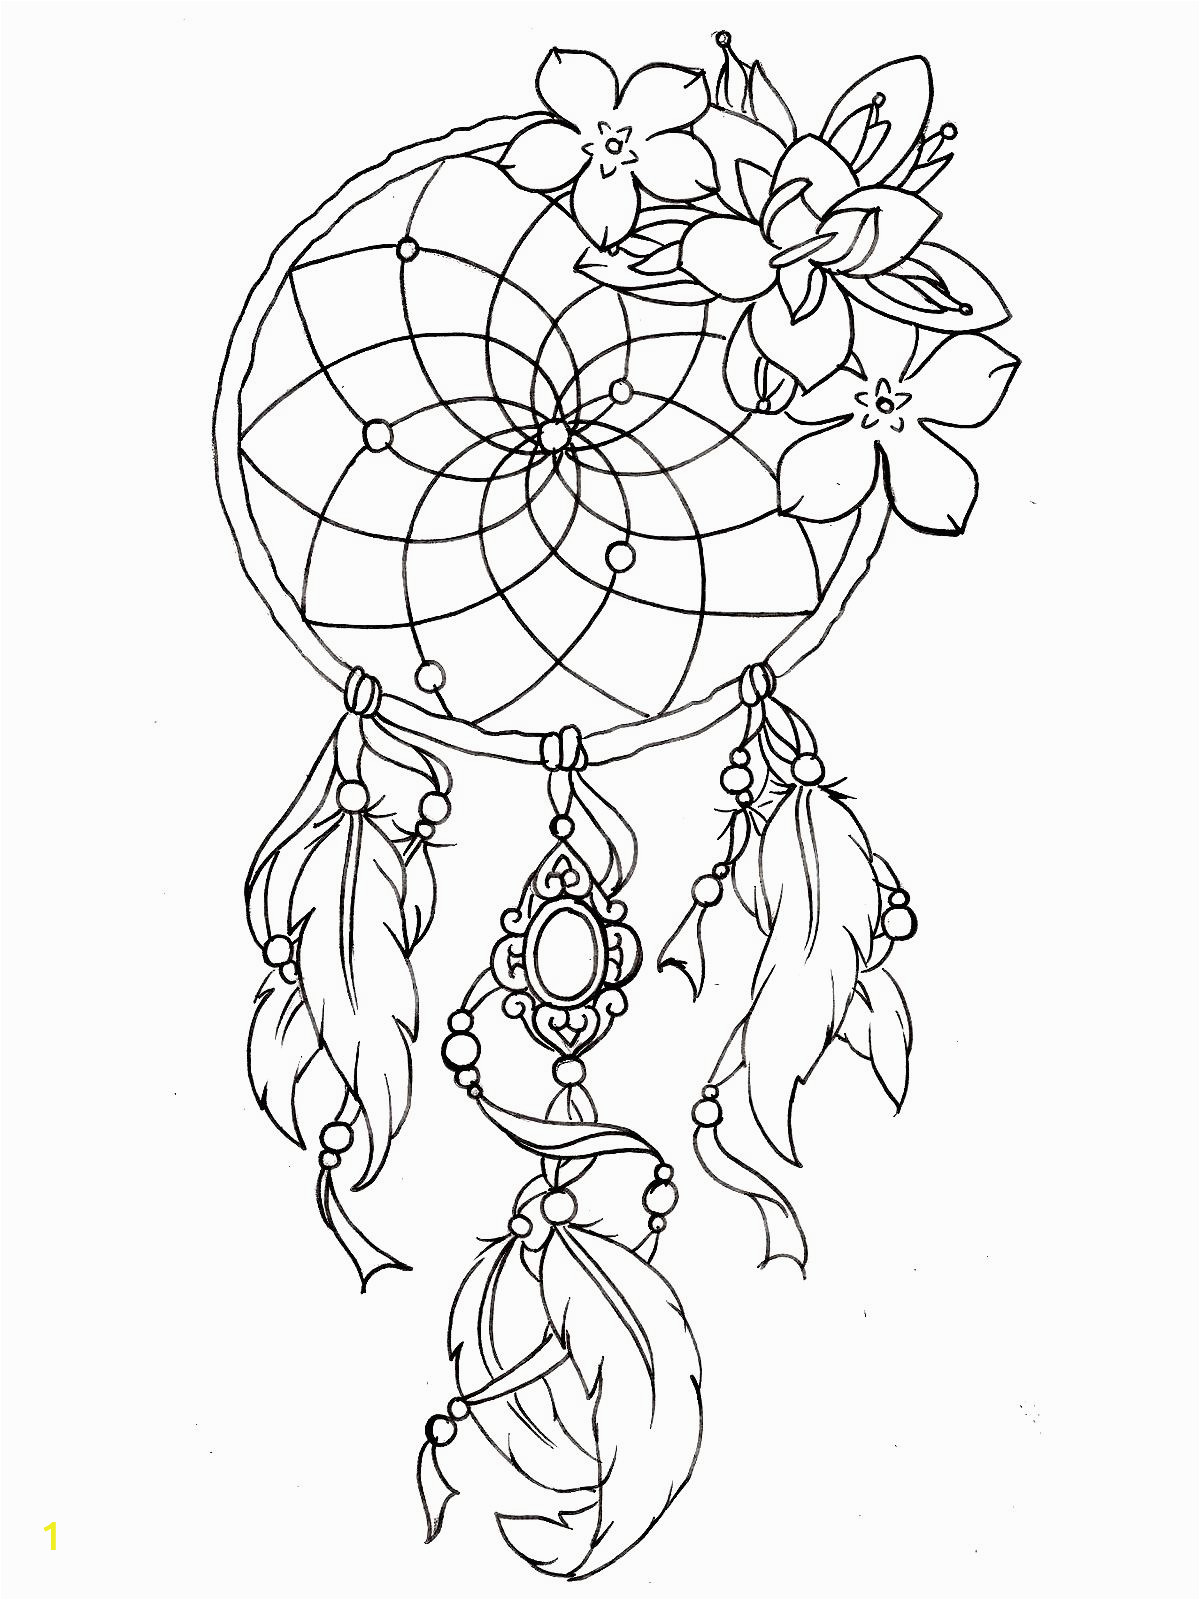 Tattoo Design Tattoo Coloring Pages for Adults Dreamcatcher Tattoo Designs Tattoos Adult Coloring Pages